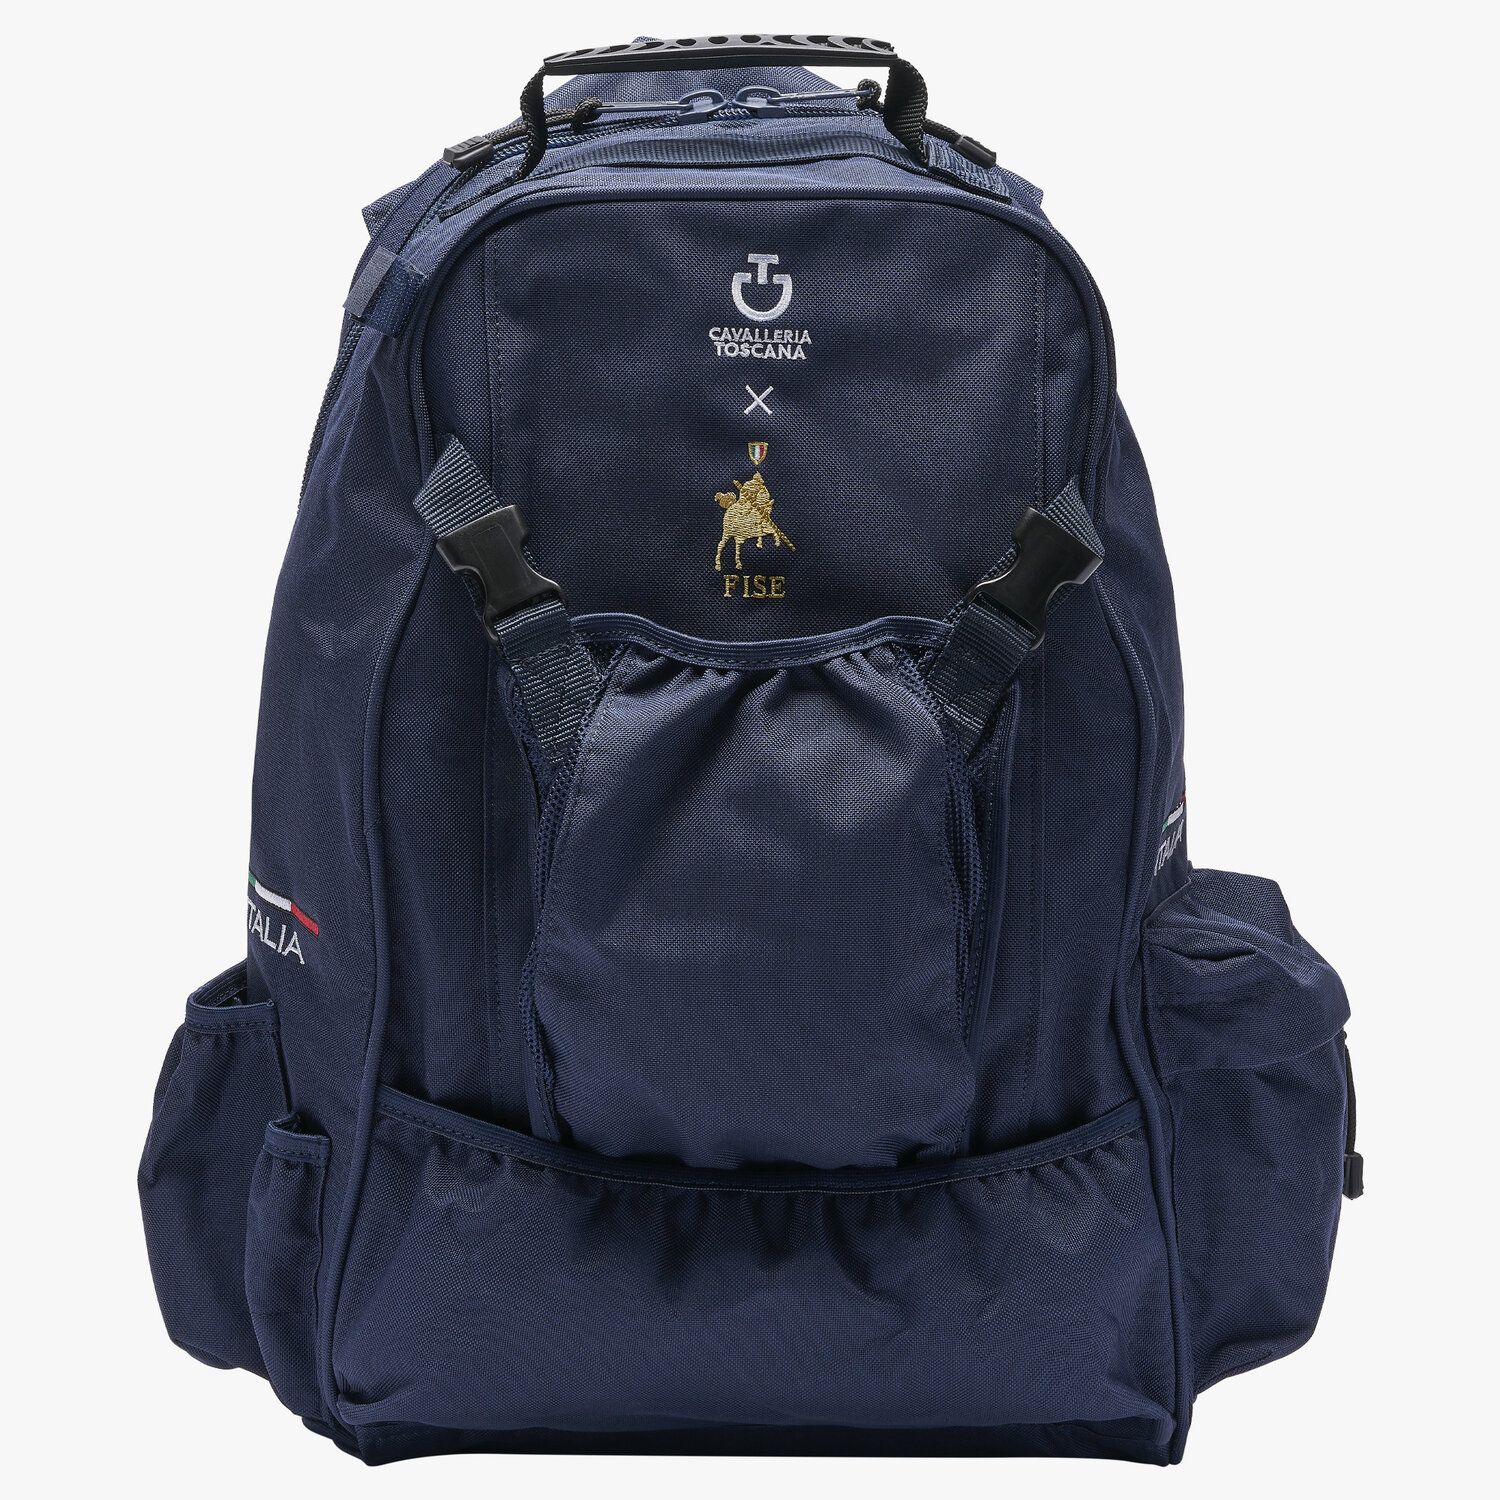 Cavalleria Toscana EQUESTRIAN BACKPACK FISE NAVY-1